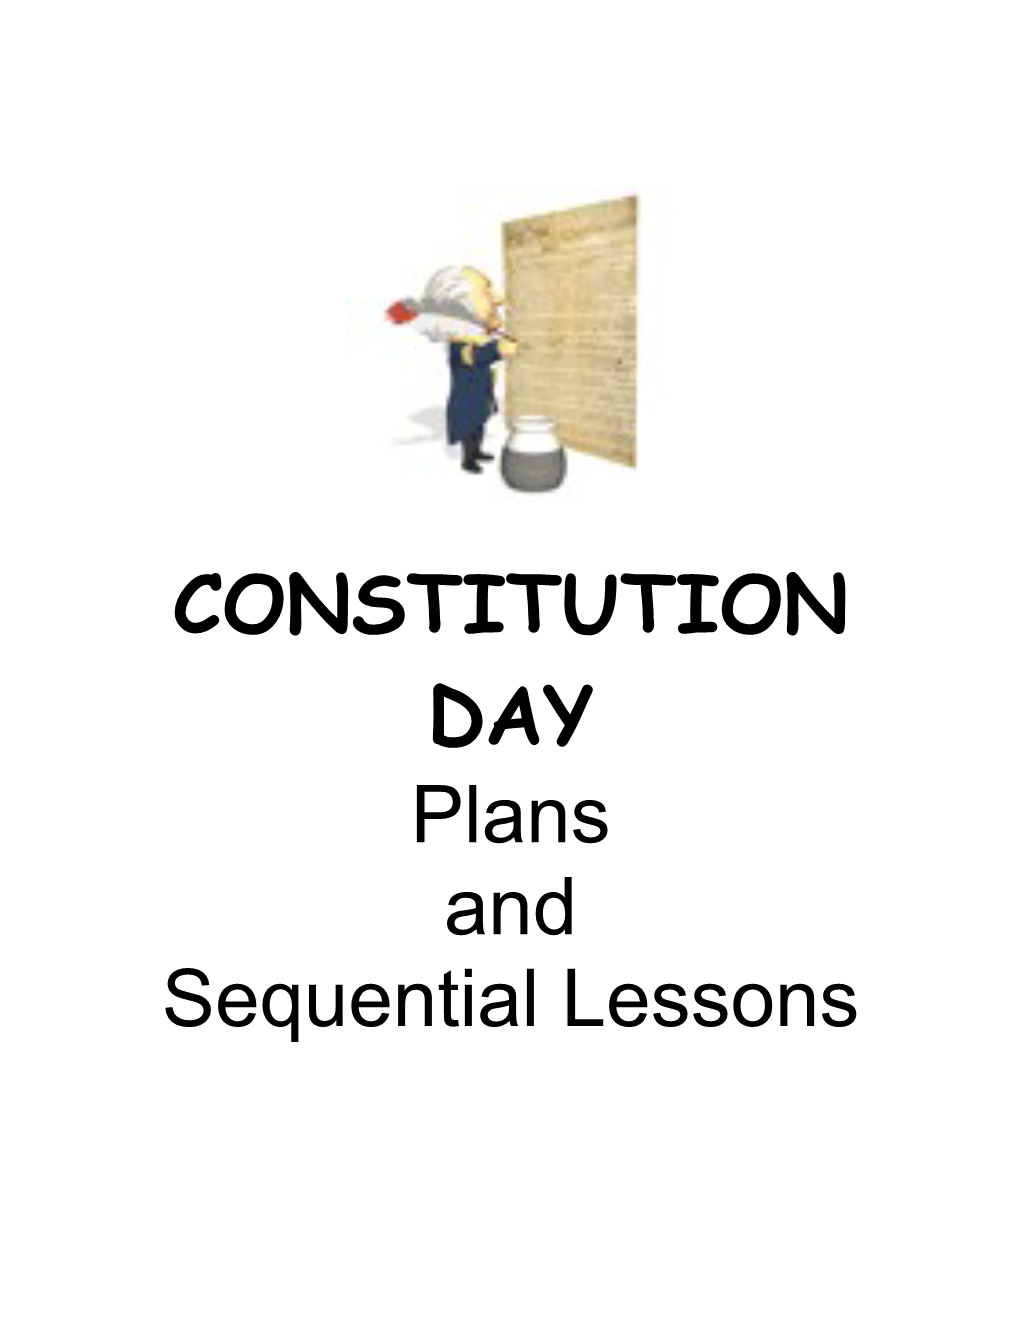 CONSTITUTION DAY Plans